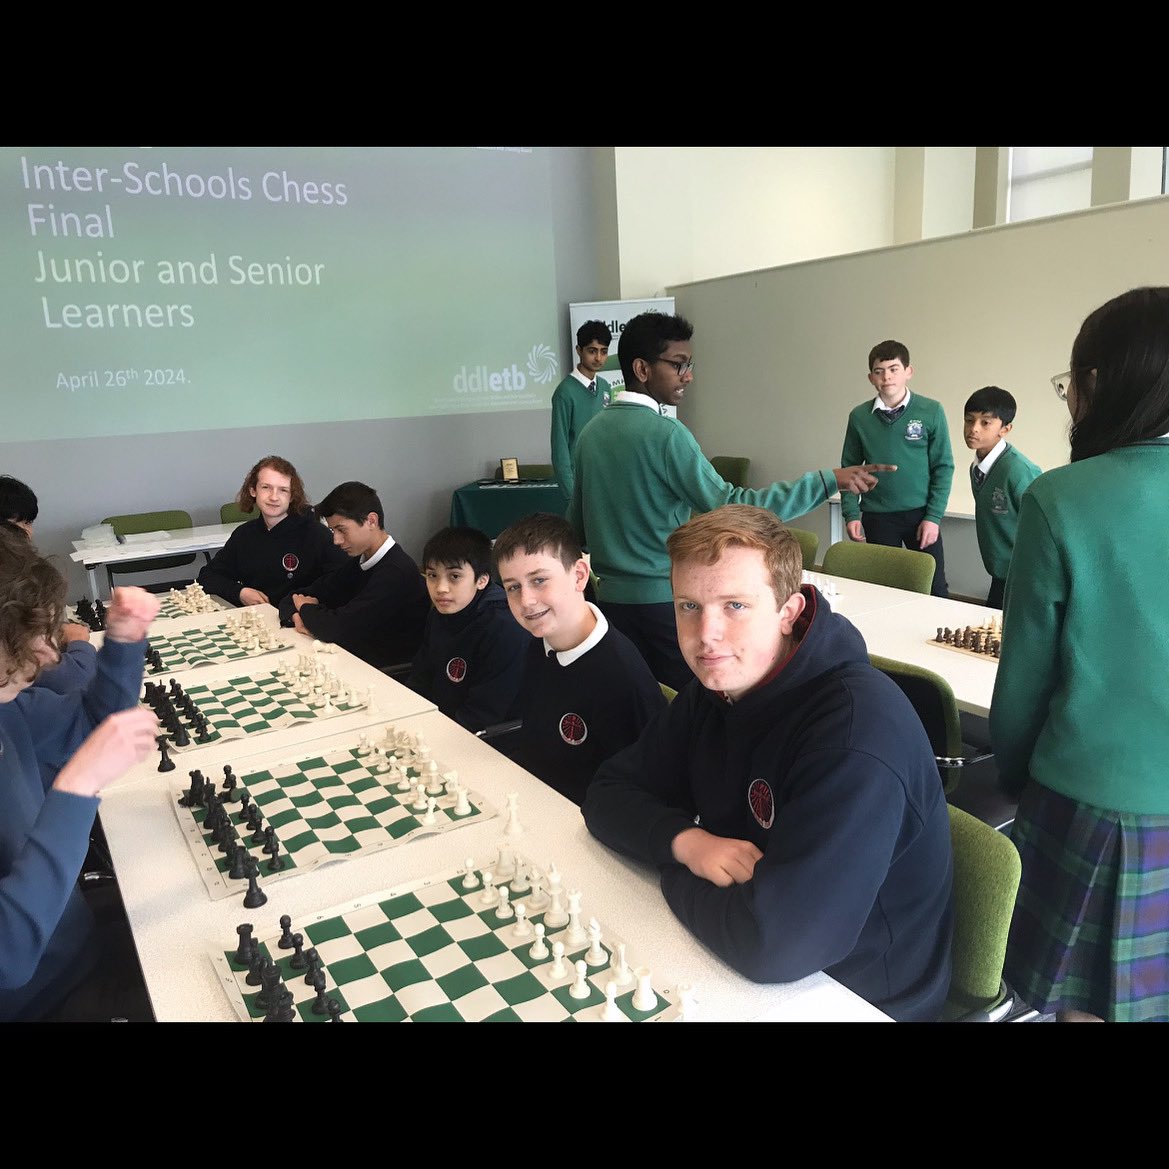 Thrilled to attend the inaugural DDLETB Internet-schools Chess Final at our Head Office! We are delighted to be meeting with our @ddletb community. Let the games begin! 🏆🎉 #ChessFinal #CommunityColleges #DDLETB